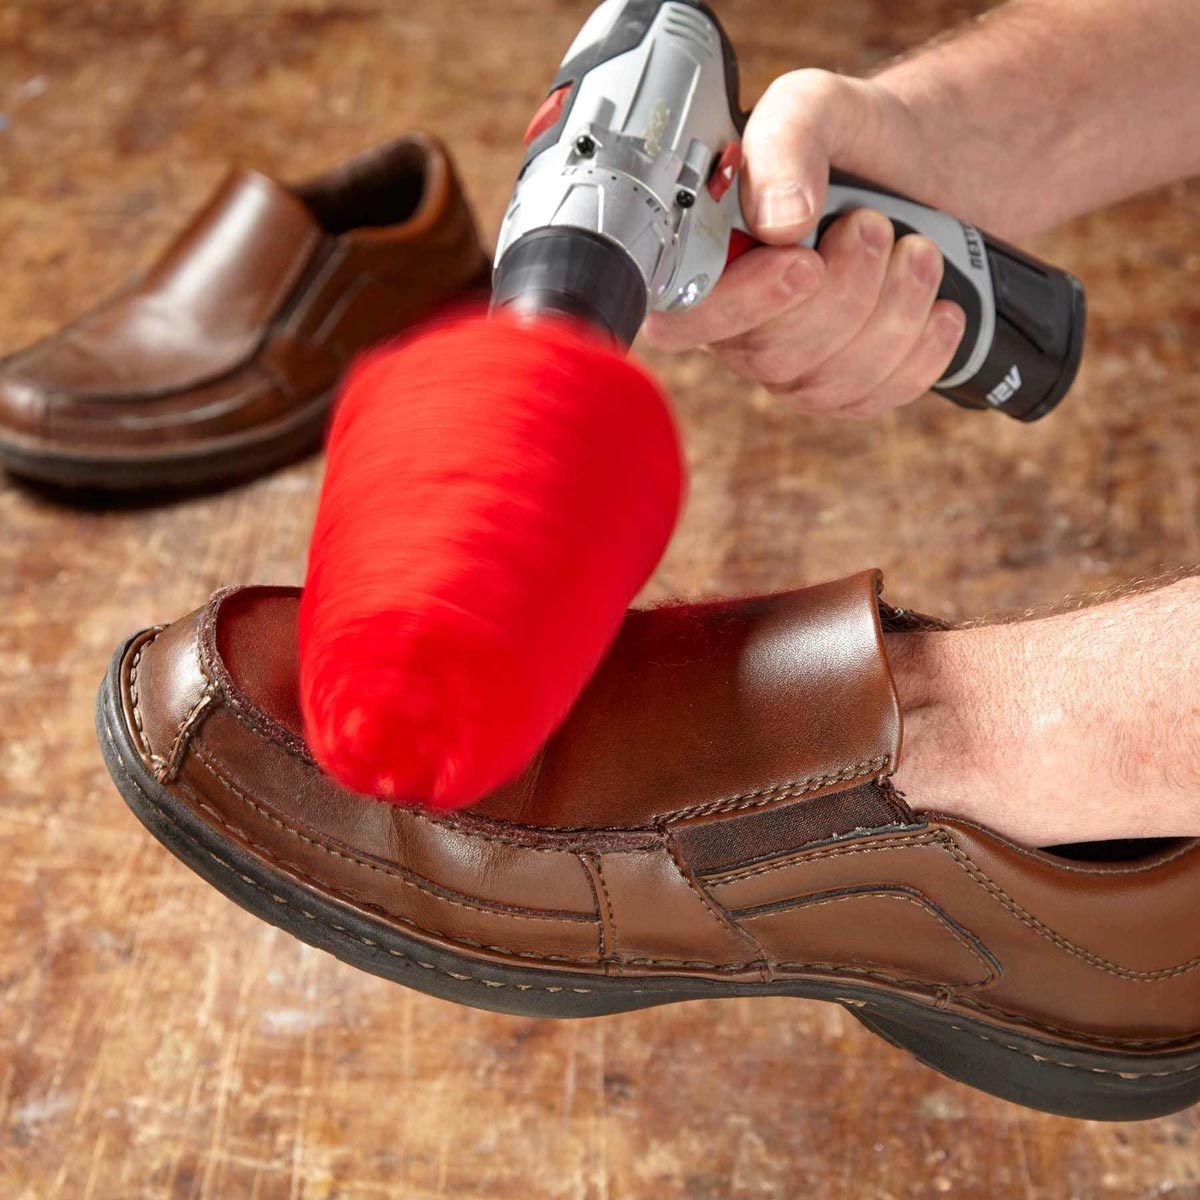 Prepare Shoes Properly